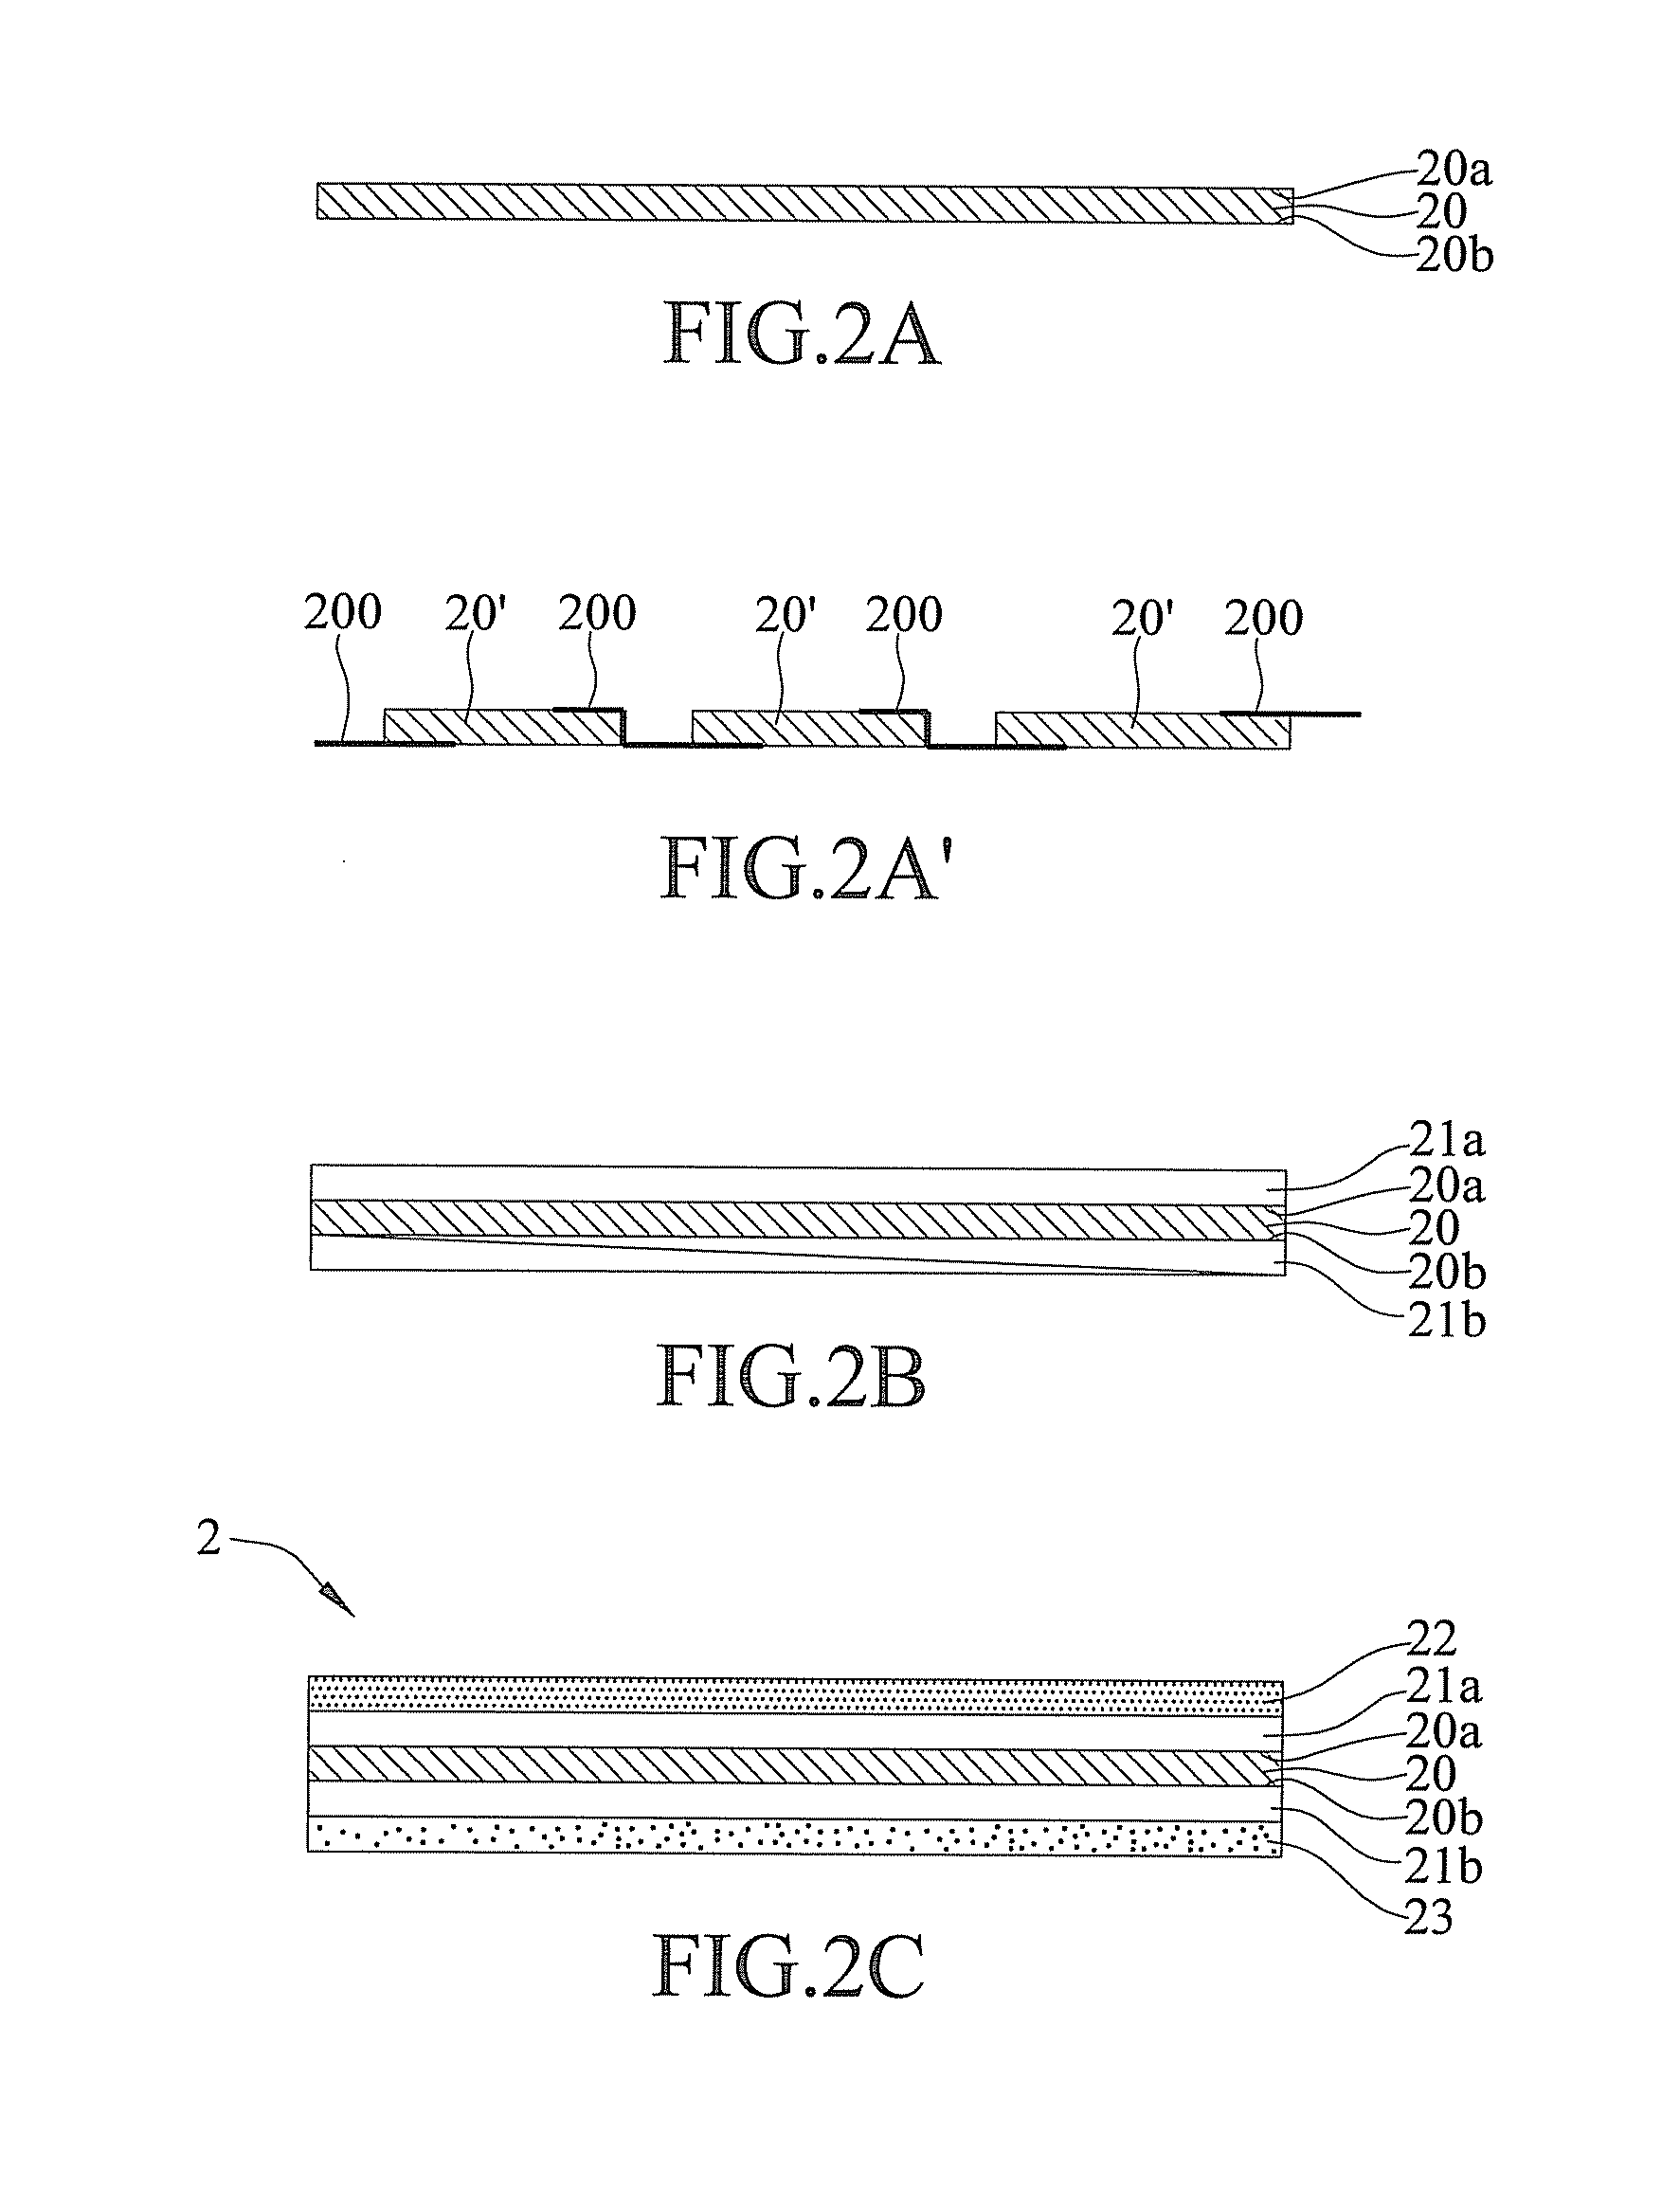 Iii-v solar cell package and method of fabricating the same